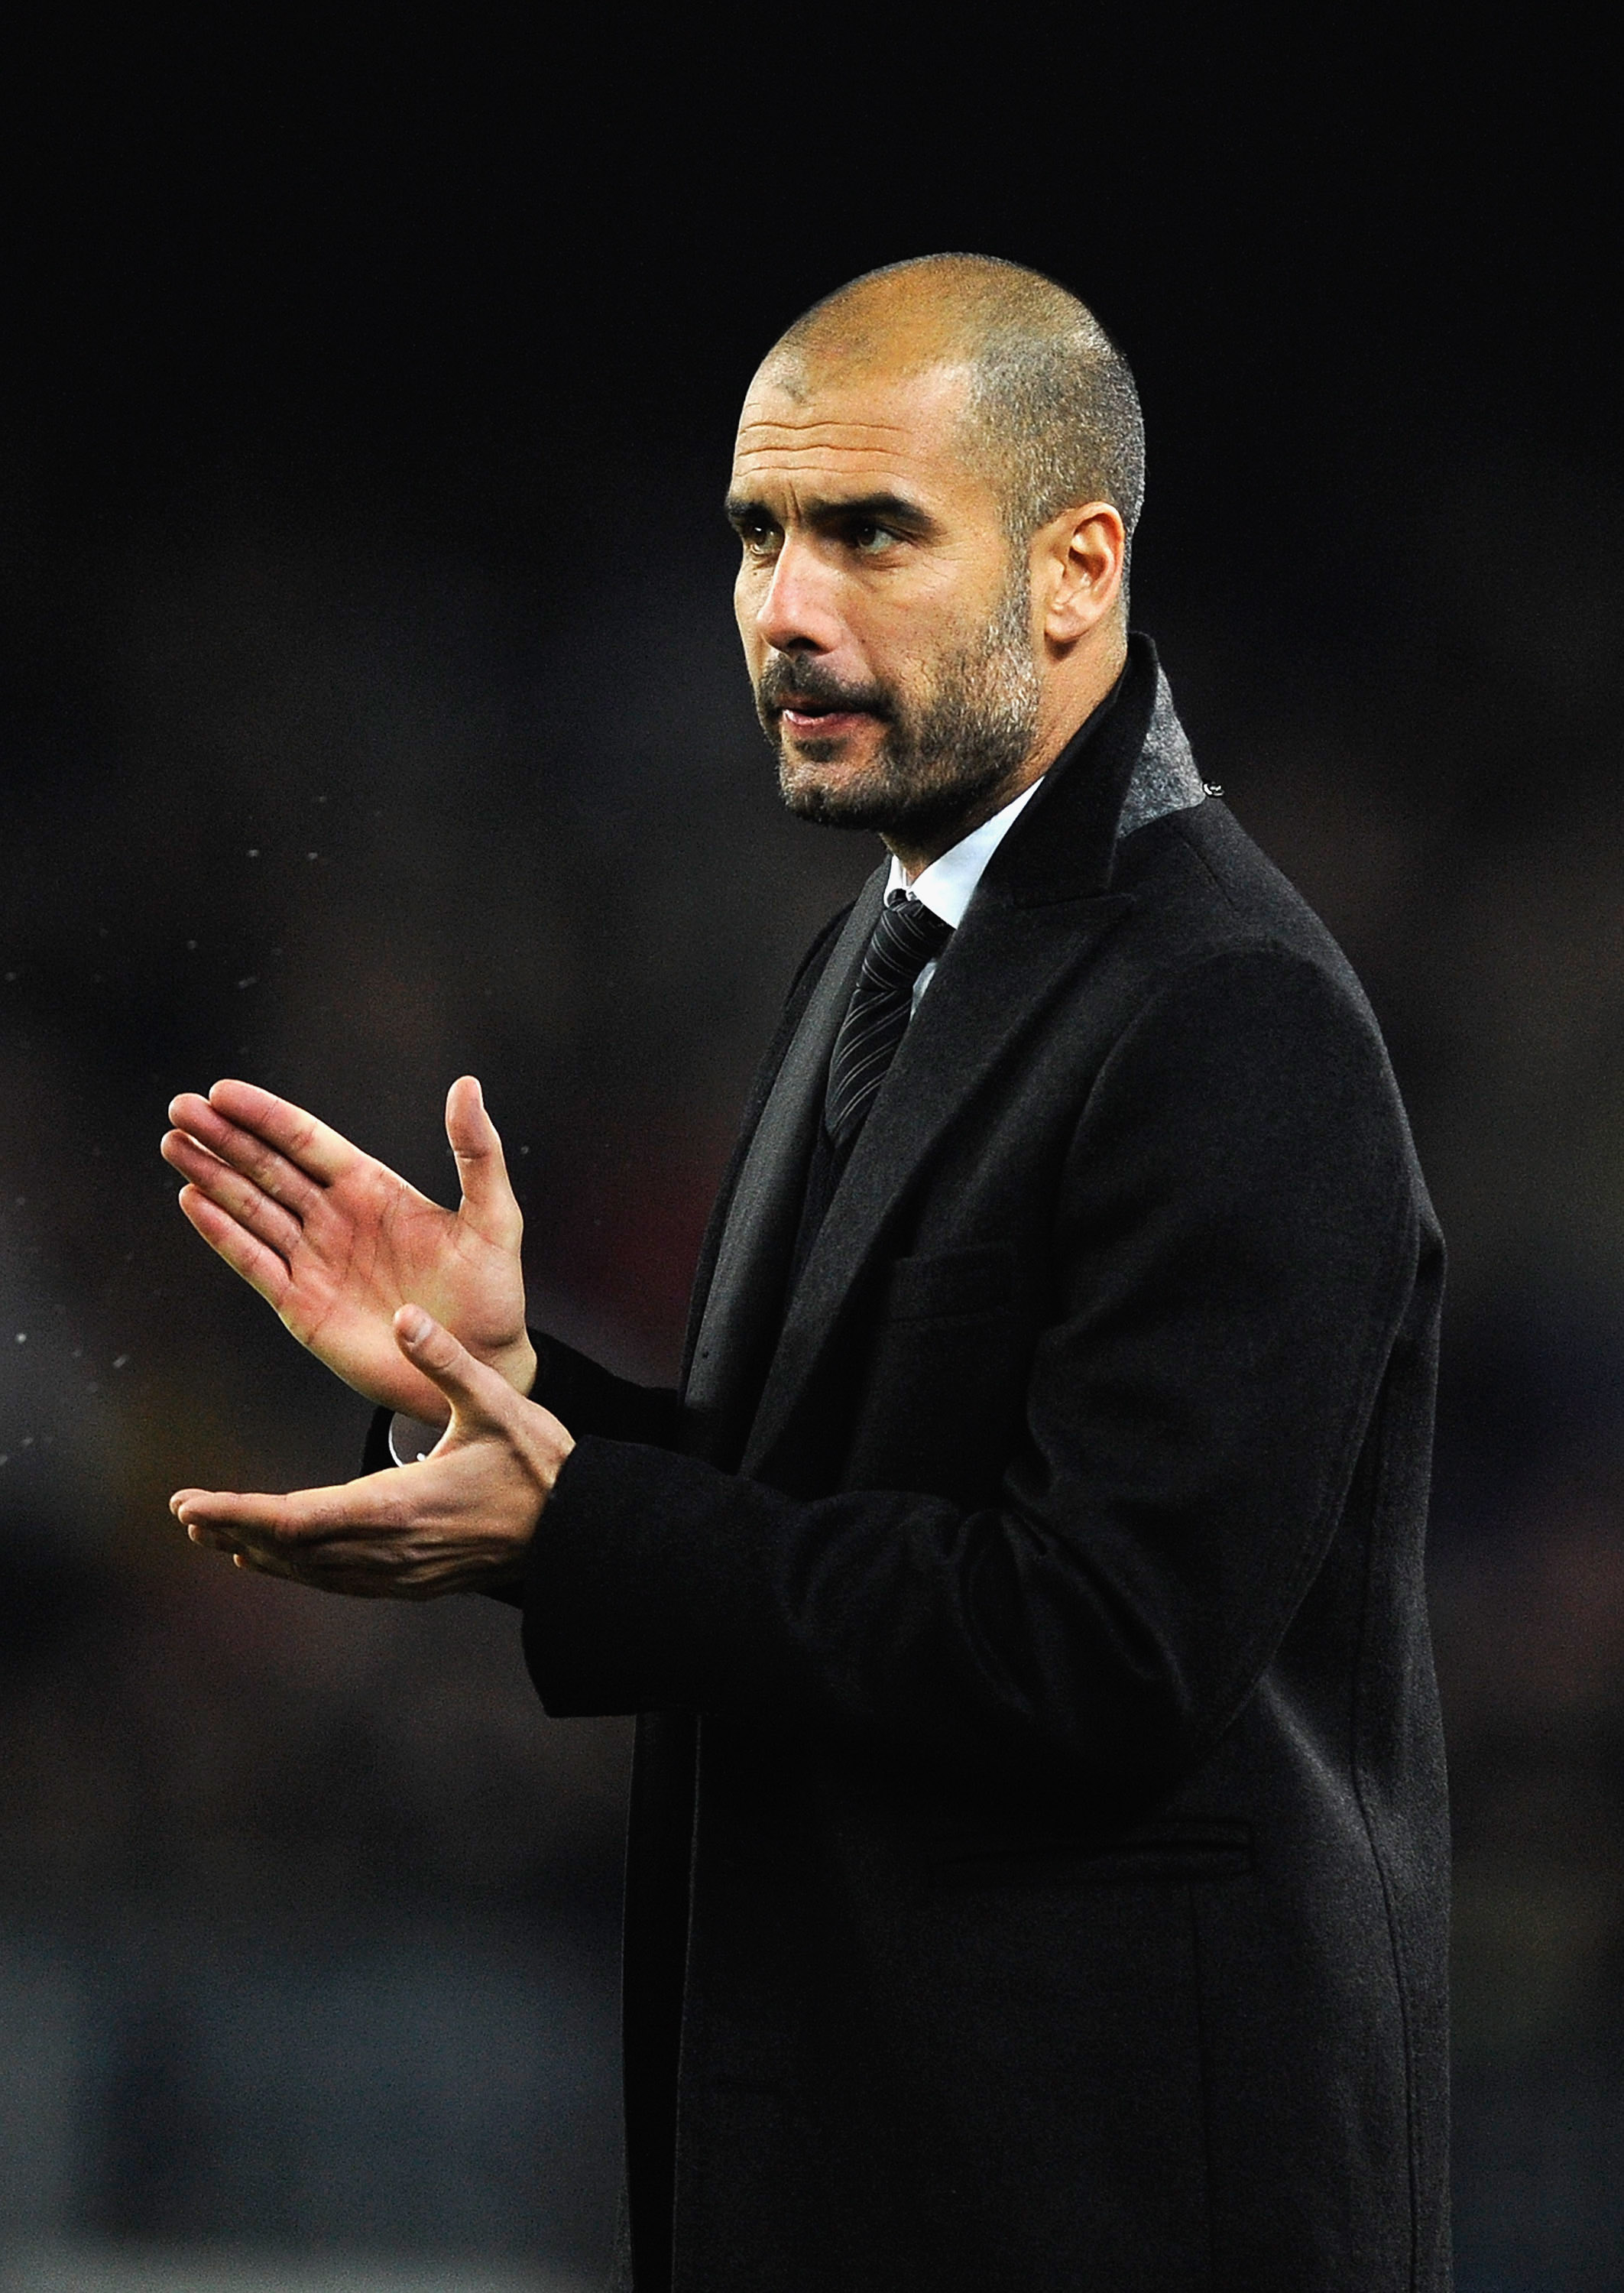 BARCELONA, SPAIN - DECEMBER 12:  Head coach Josep Guardiola of Barcelona claps his hands during the La Liga match between Barcelona and Real Sociedad at Camp Nou Stadium on December 12, 2010 in Barcelona, Spain. Barcelona won the match 5-0.  (Photo by Dav